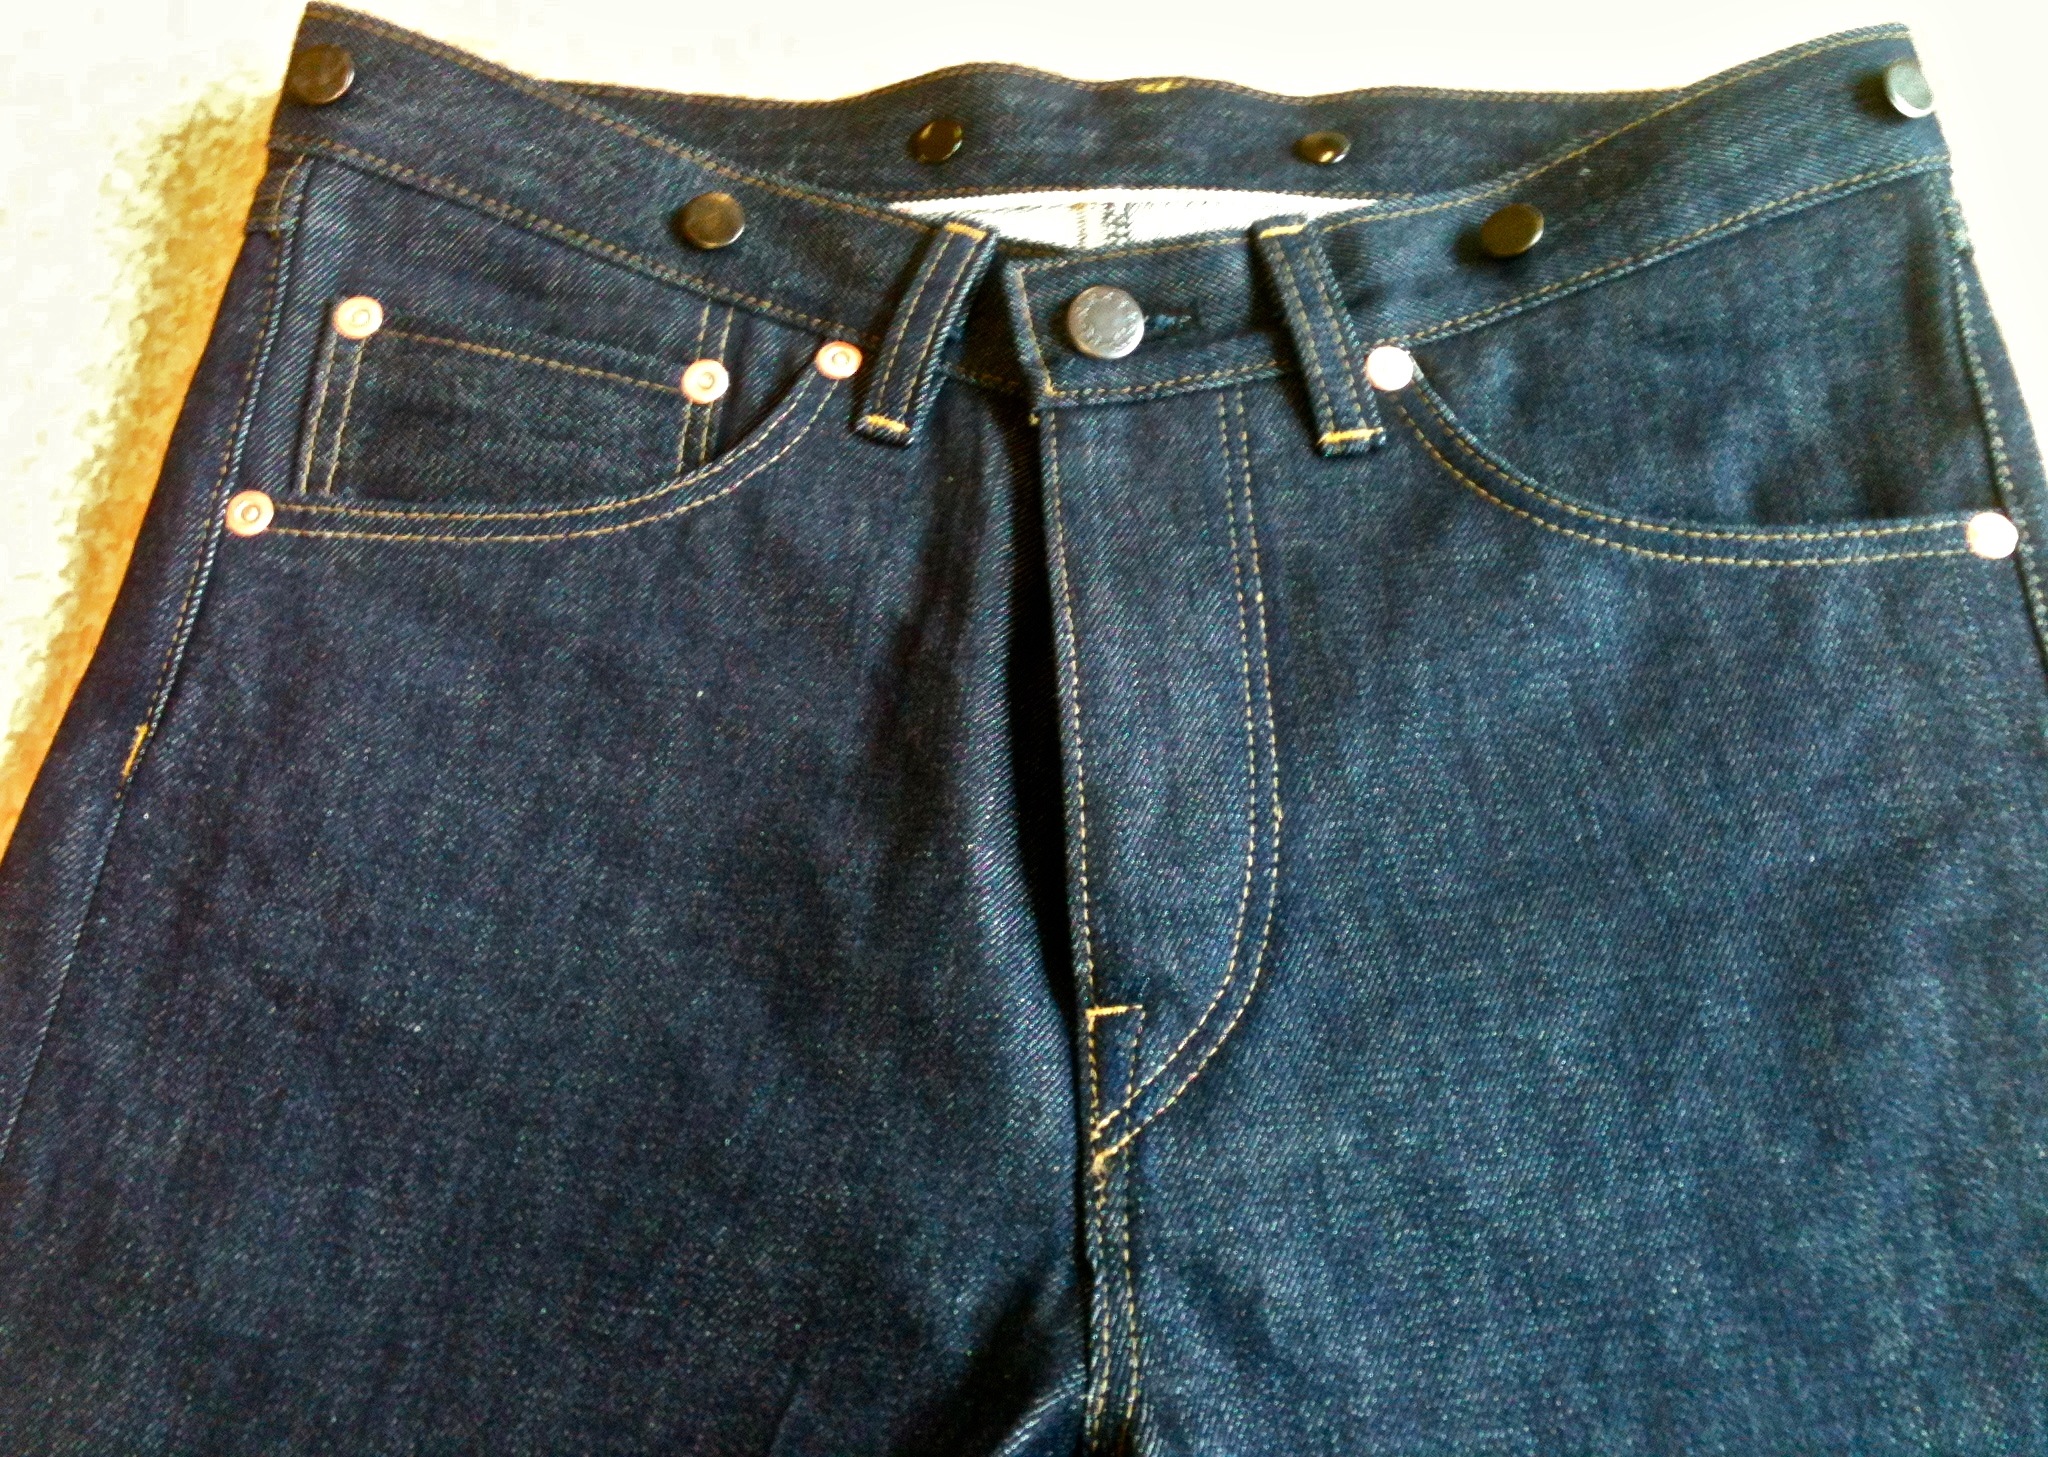 Making Your Own Jeans: The Sewing Part II